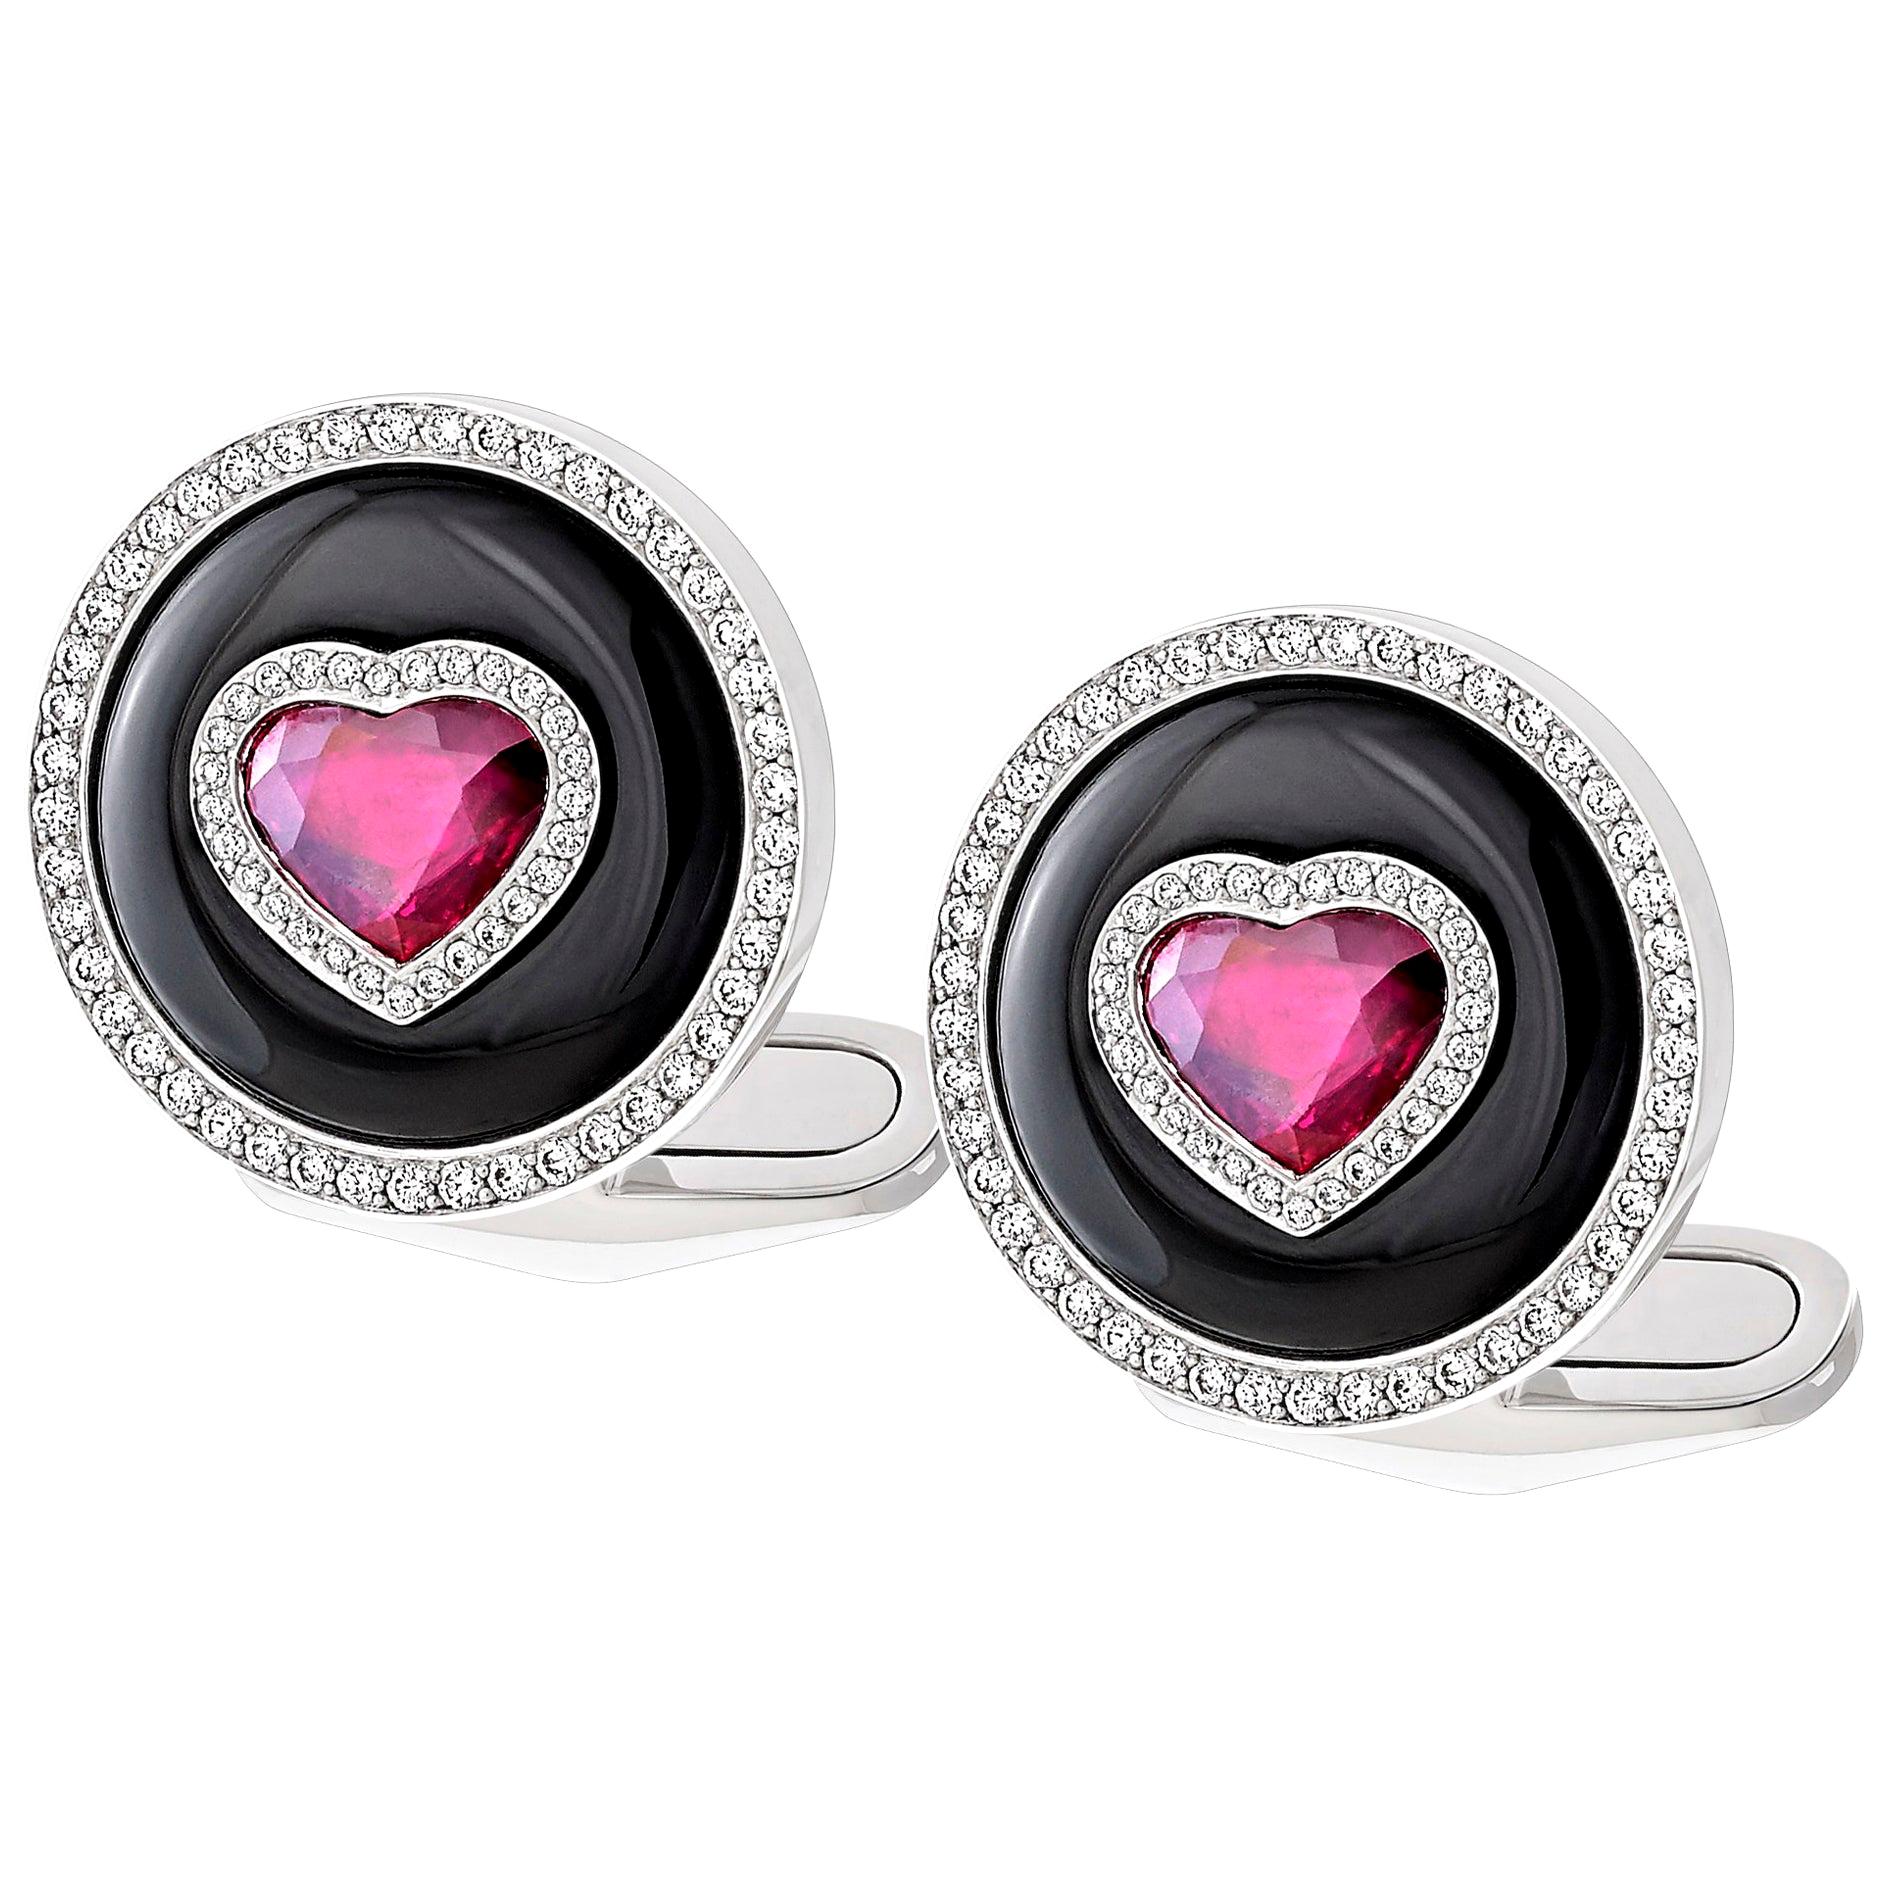 1.92 Carat Heart Shaped Ruby Cufflinks with 5.37 Carat Black Onyx in 18K Gold